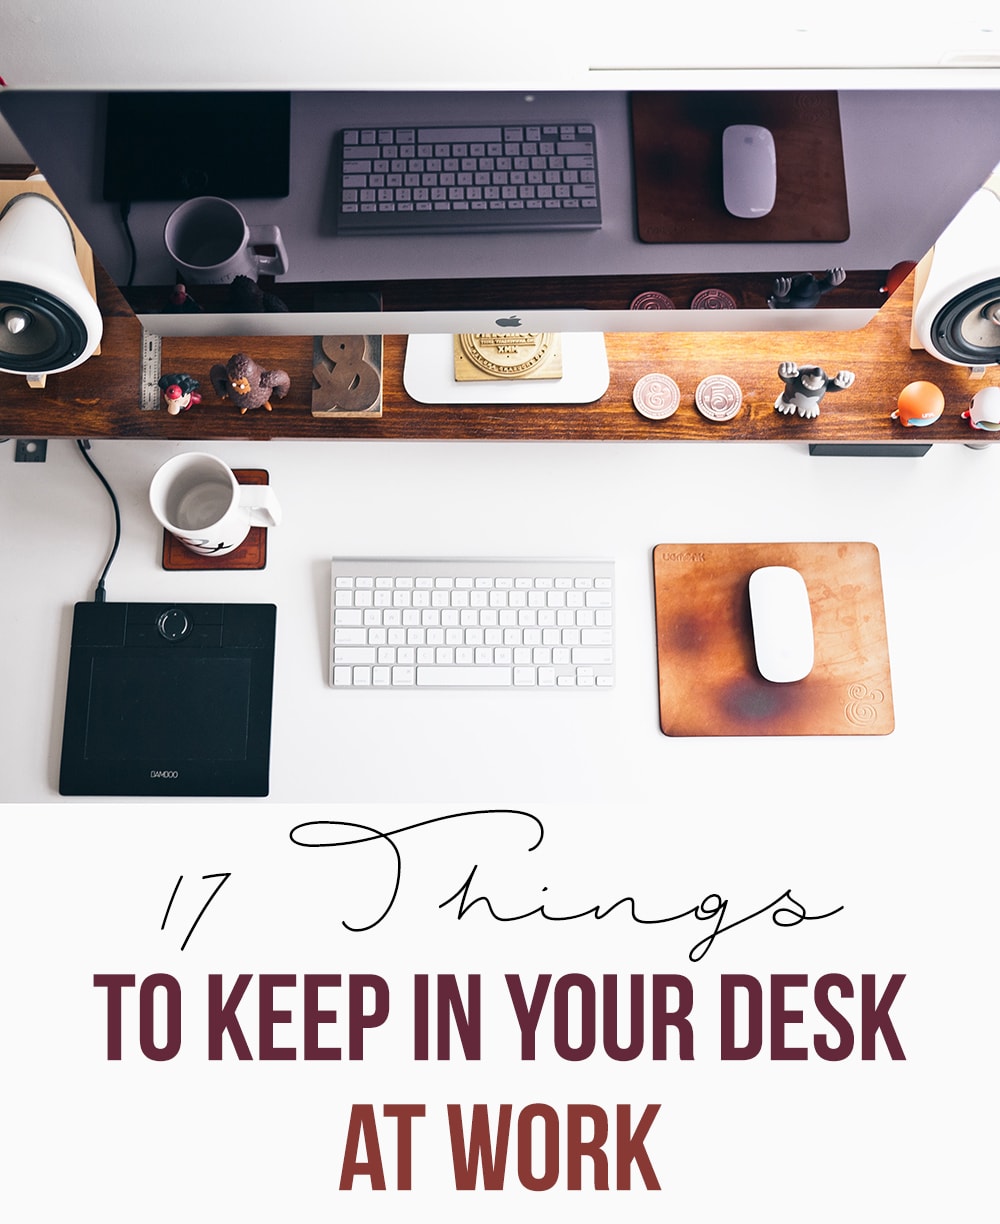 17 things to keep in your desk at work